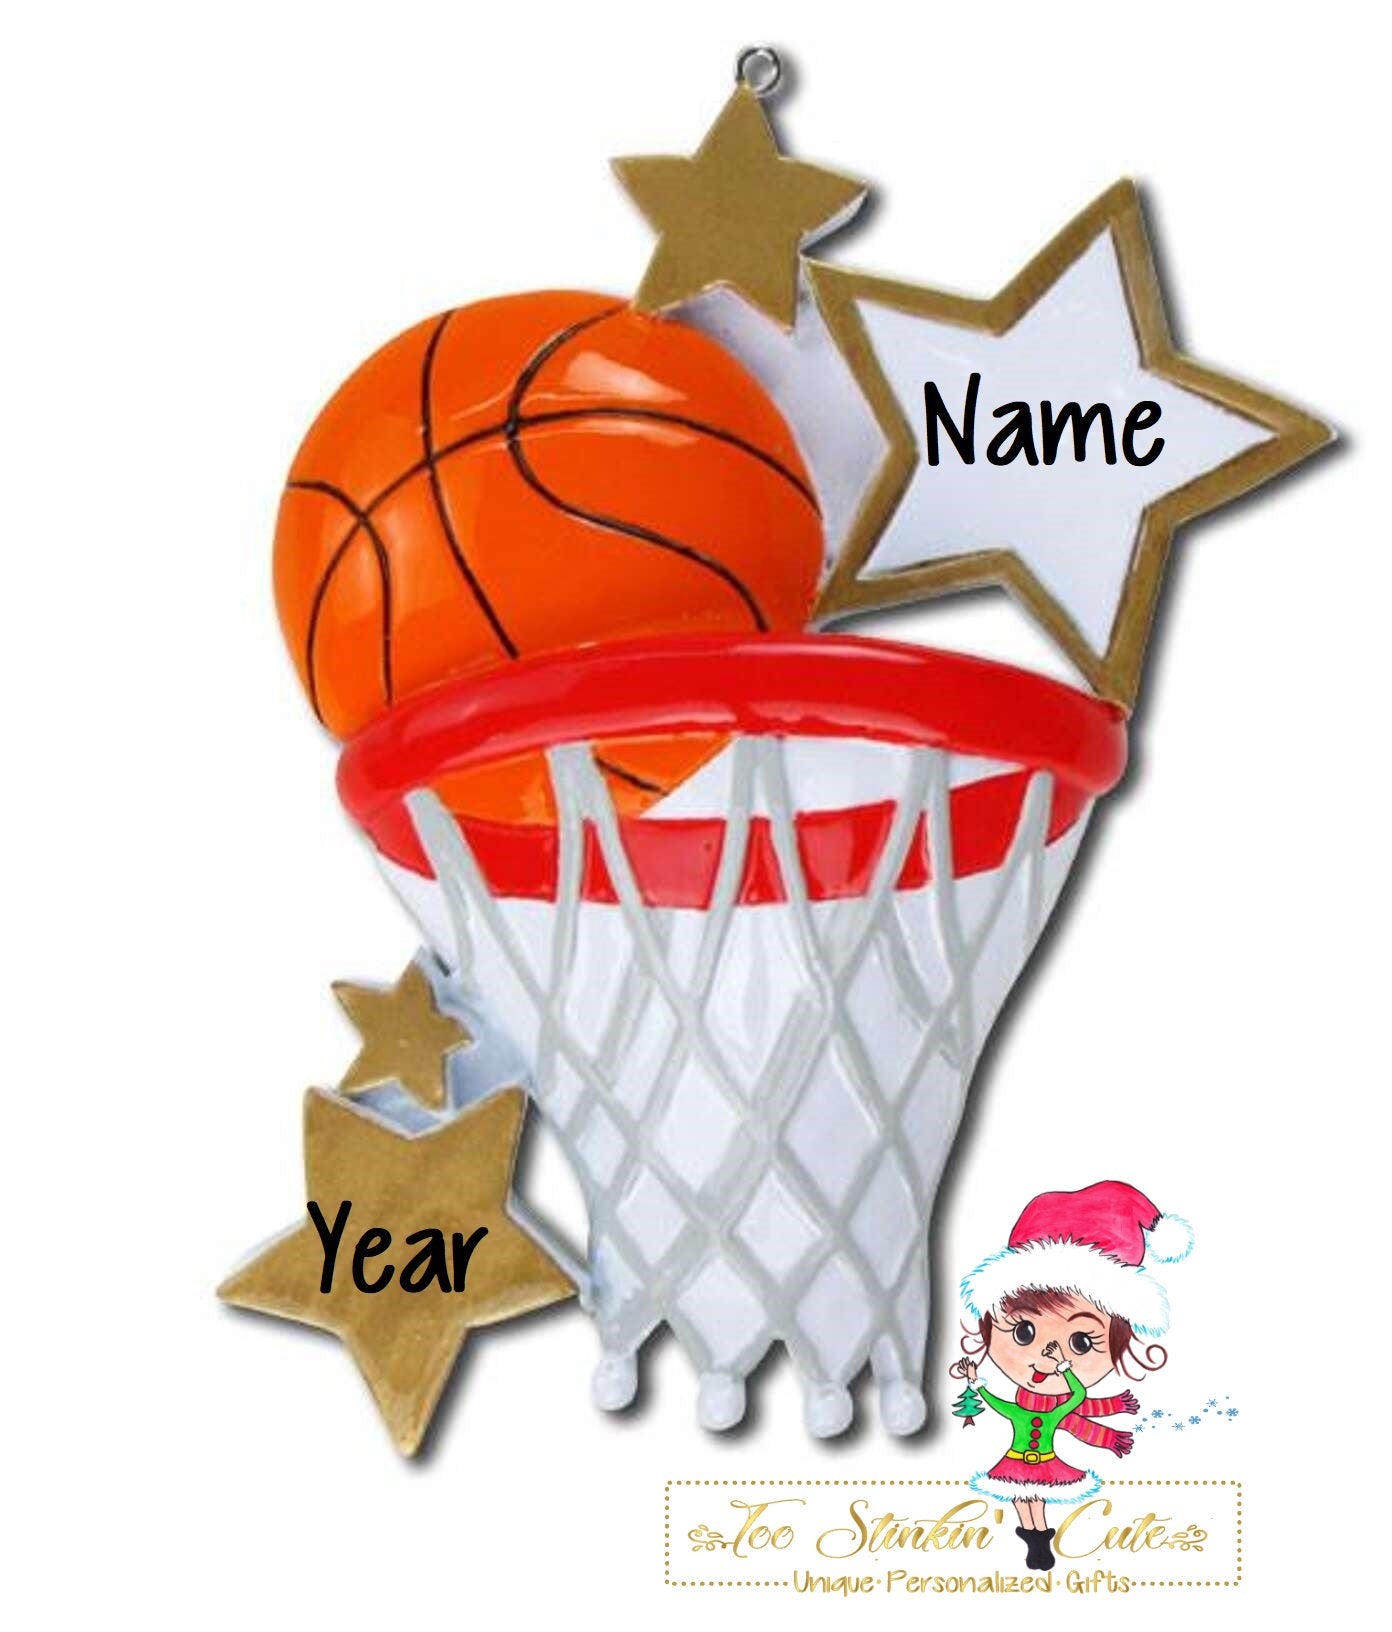 Merry Christmas And Happy New Year. New Year And Basketball Ball